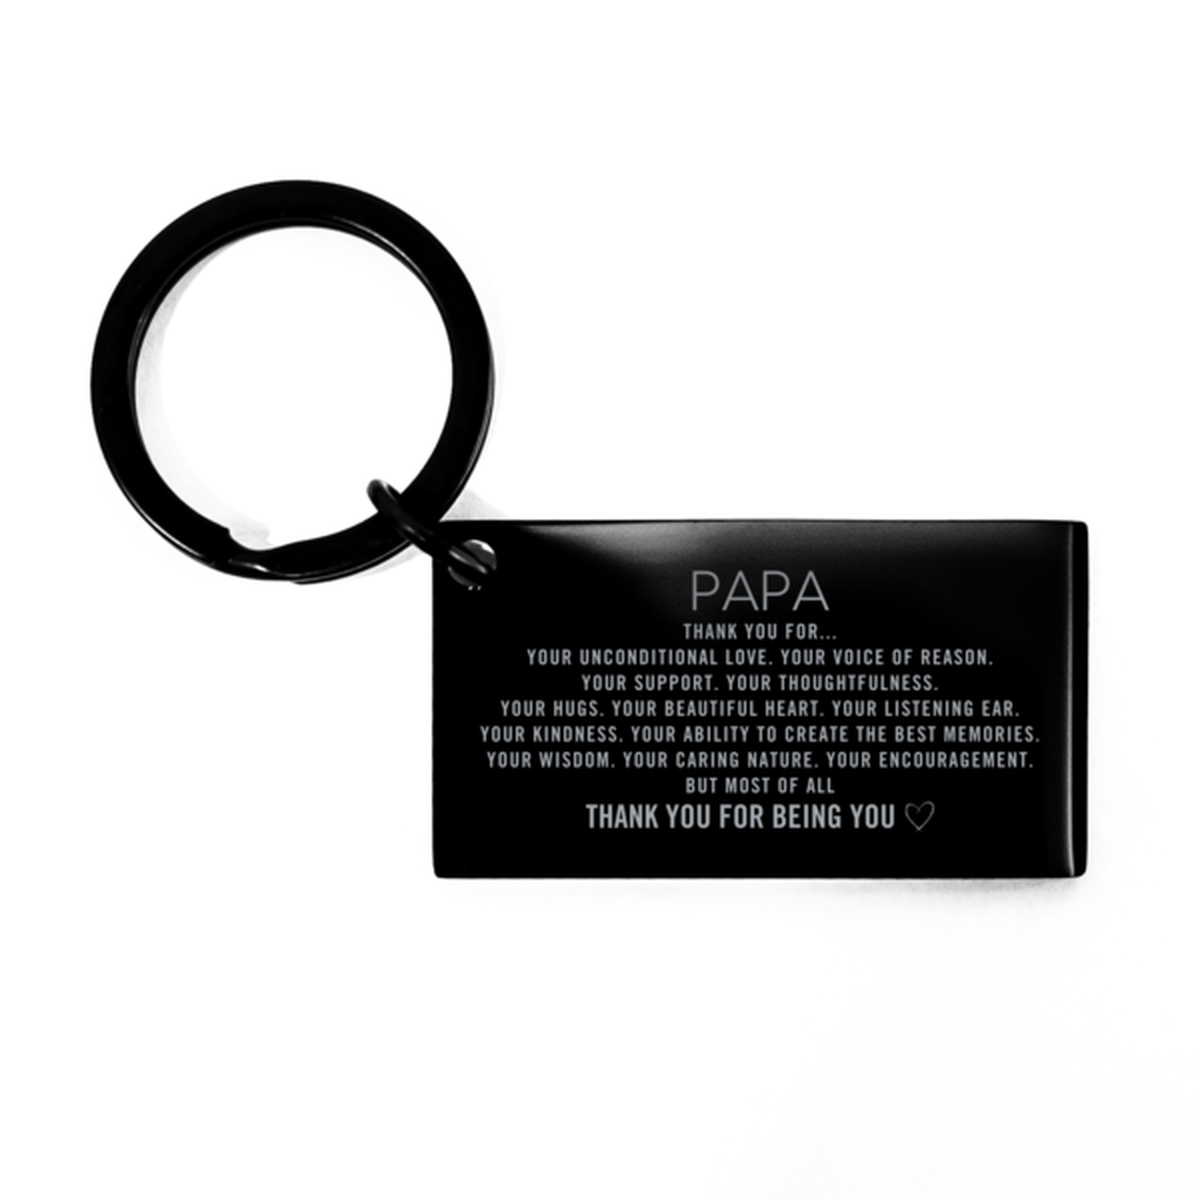 Papa Keychain Custom, Engraved Gifts For Papa Christmas Graduation Birthday Gifts for Men Women Papa Thank you for Your unconditional love